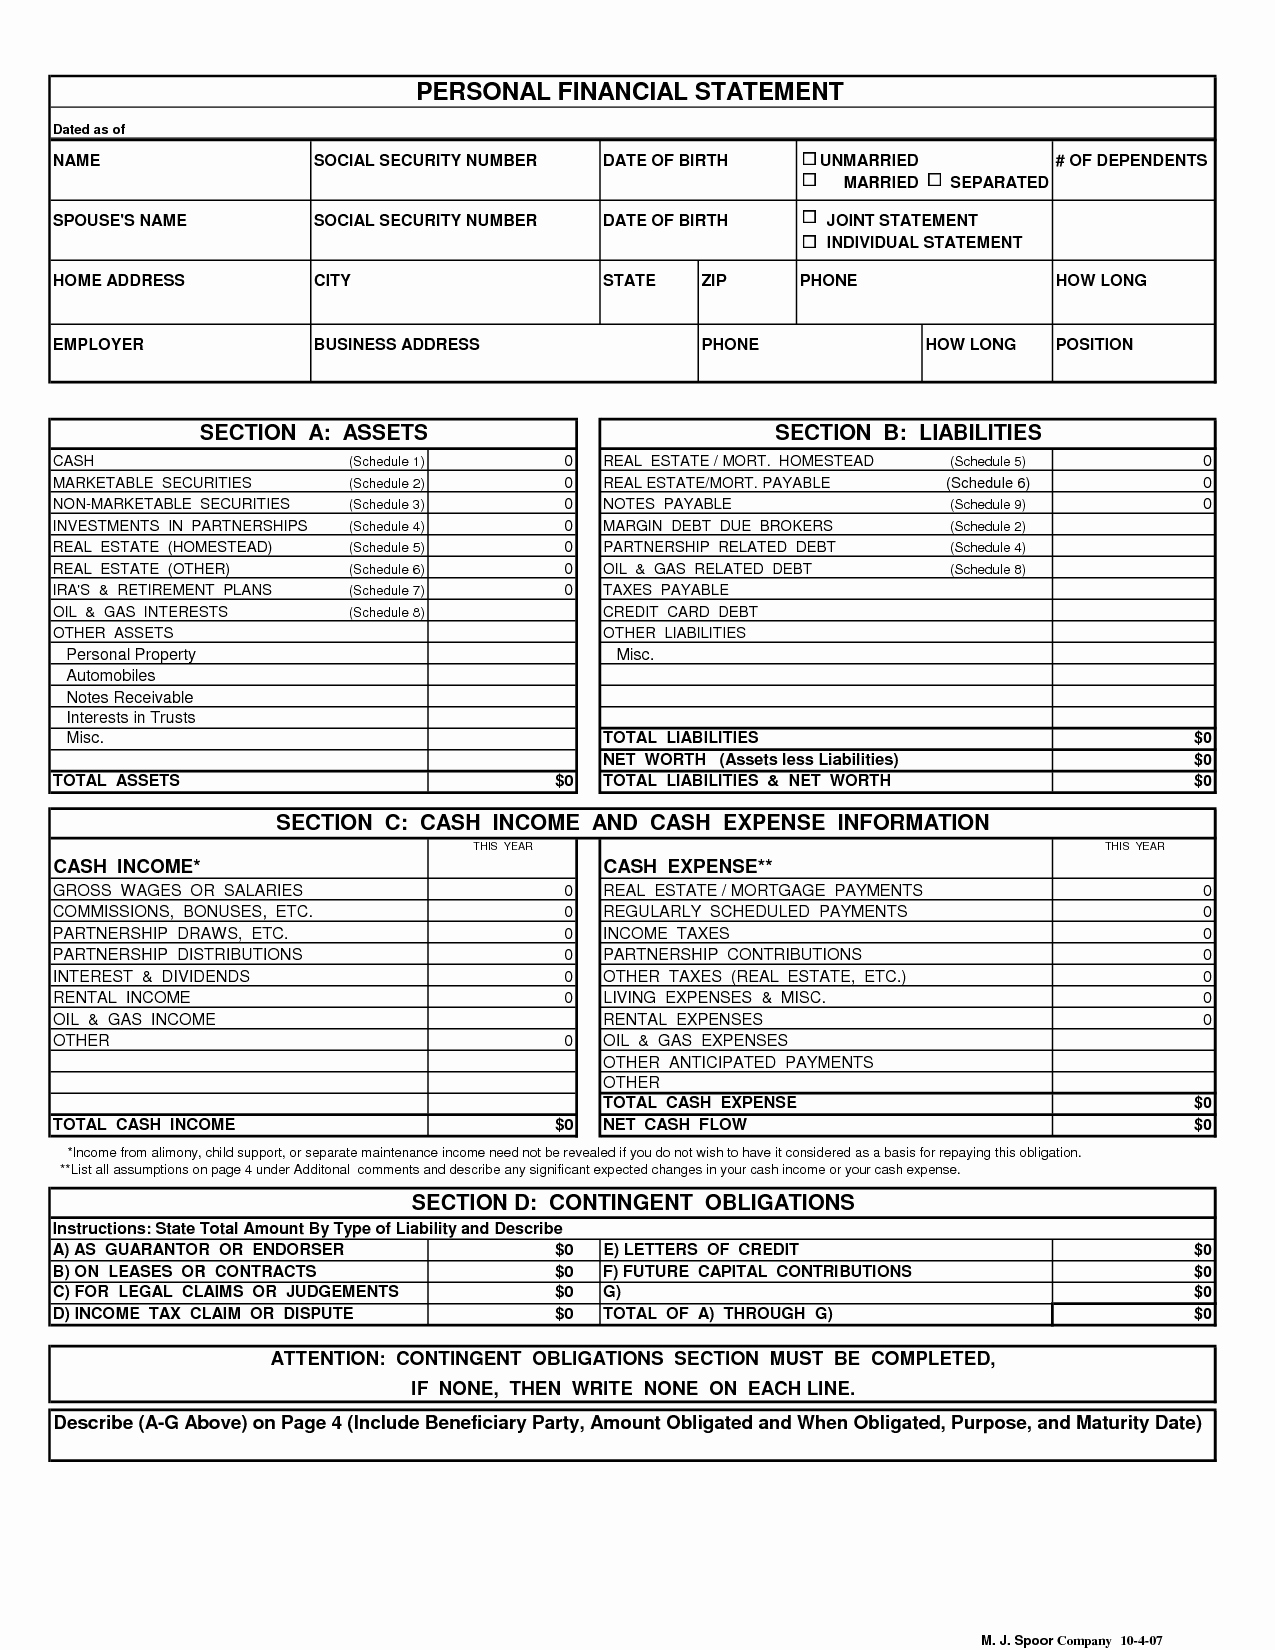 Personal Finance Planner Template Lovely Personal Financial Statement Template